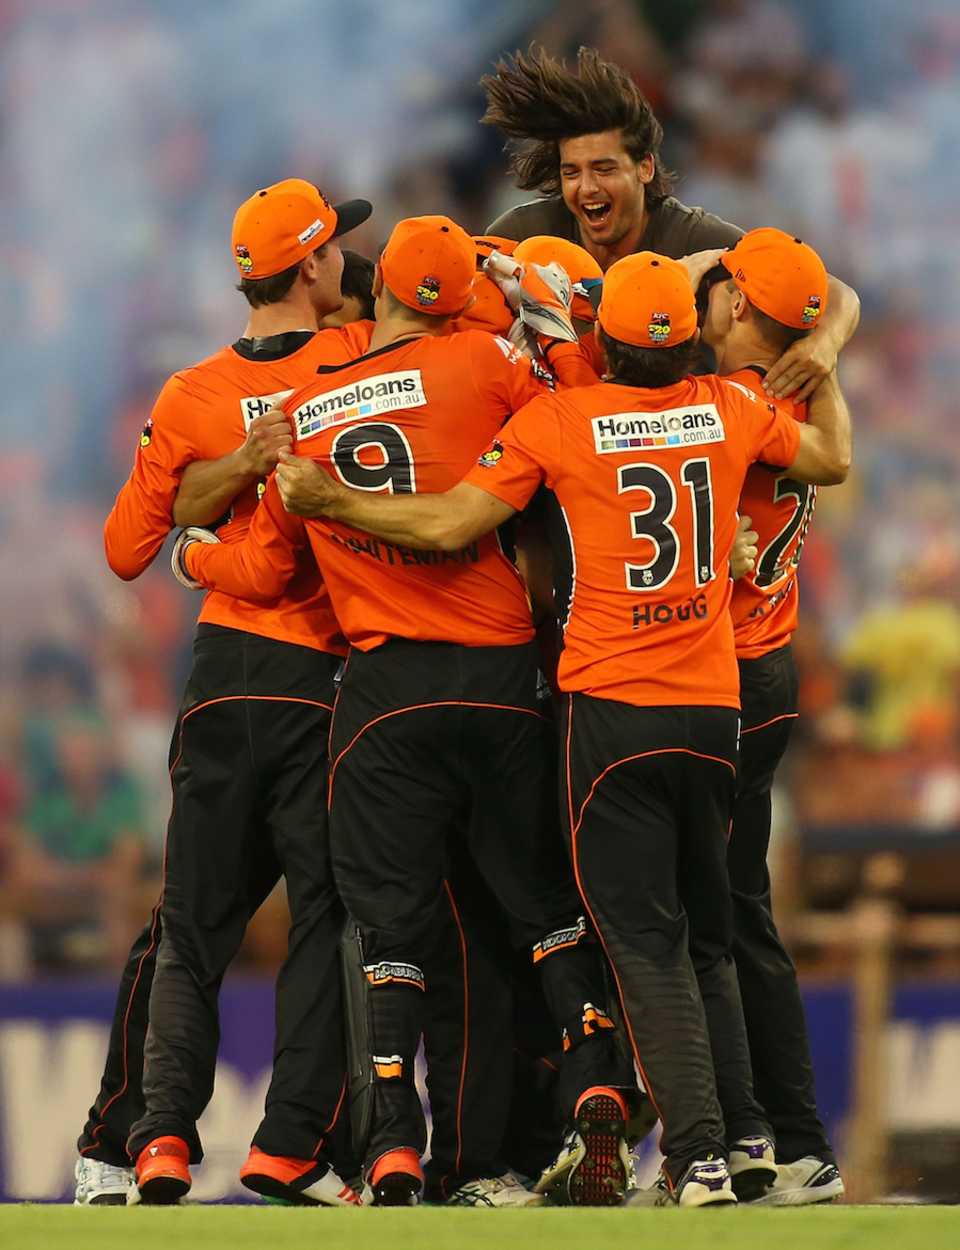 A spectator joins the Perth Scorchers players after their win